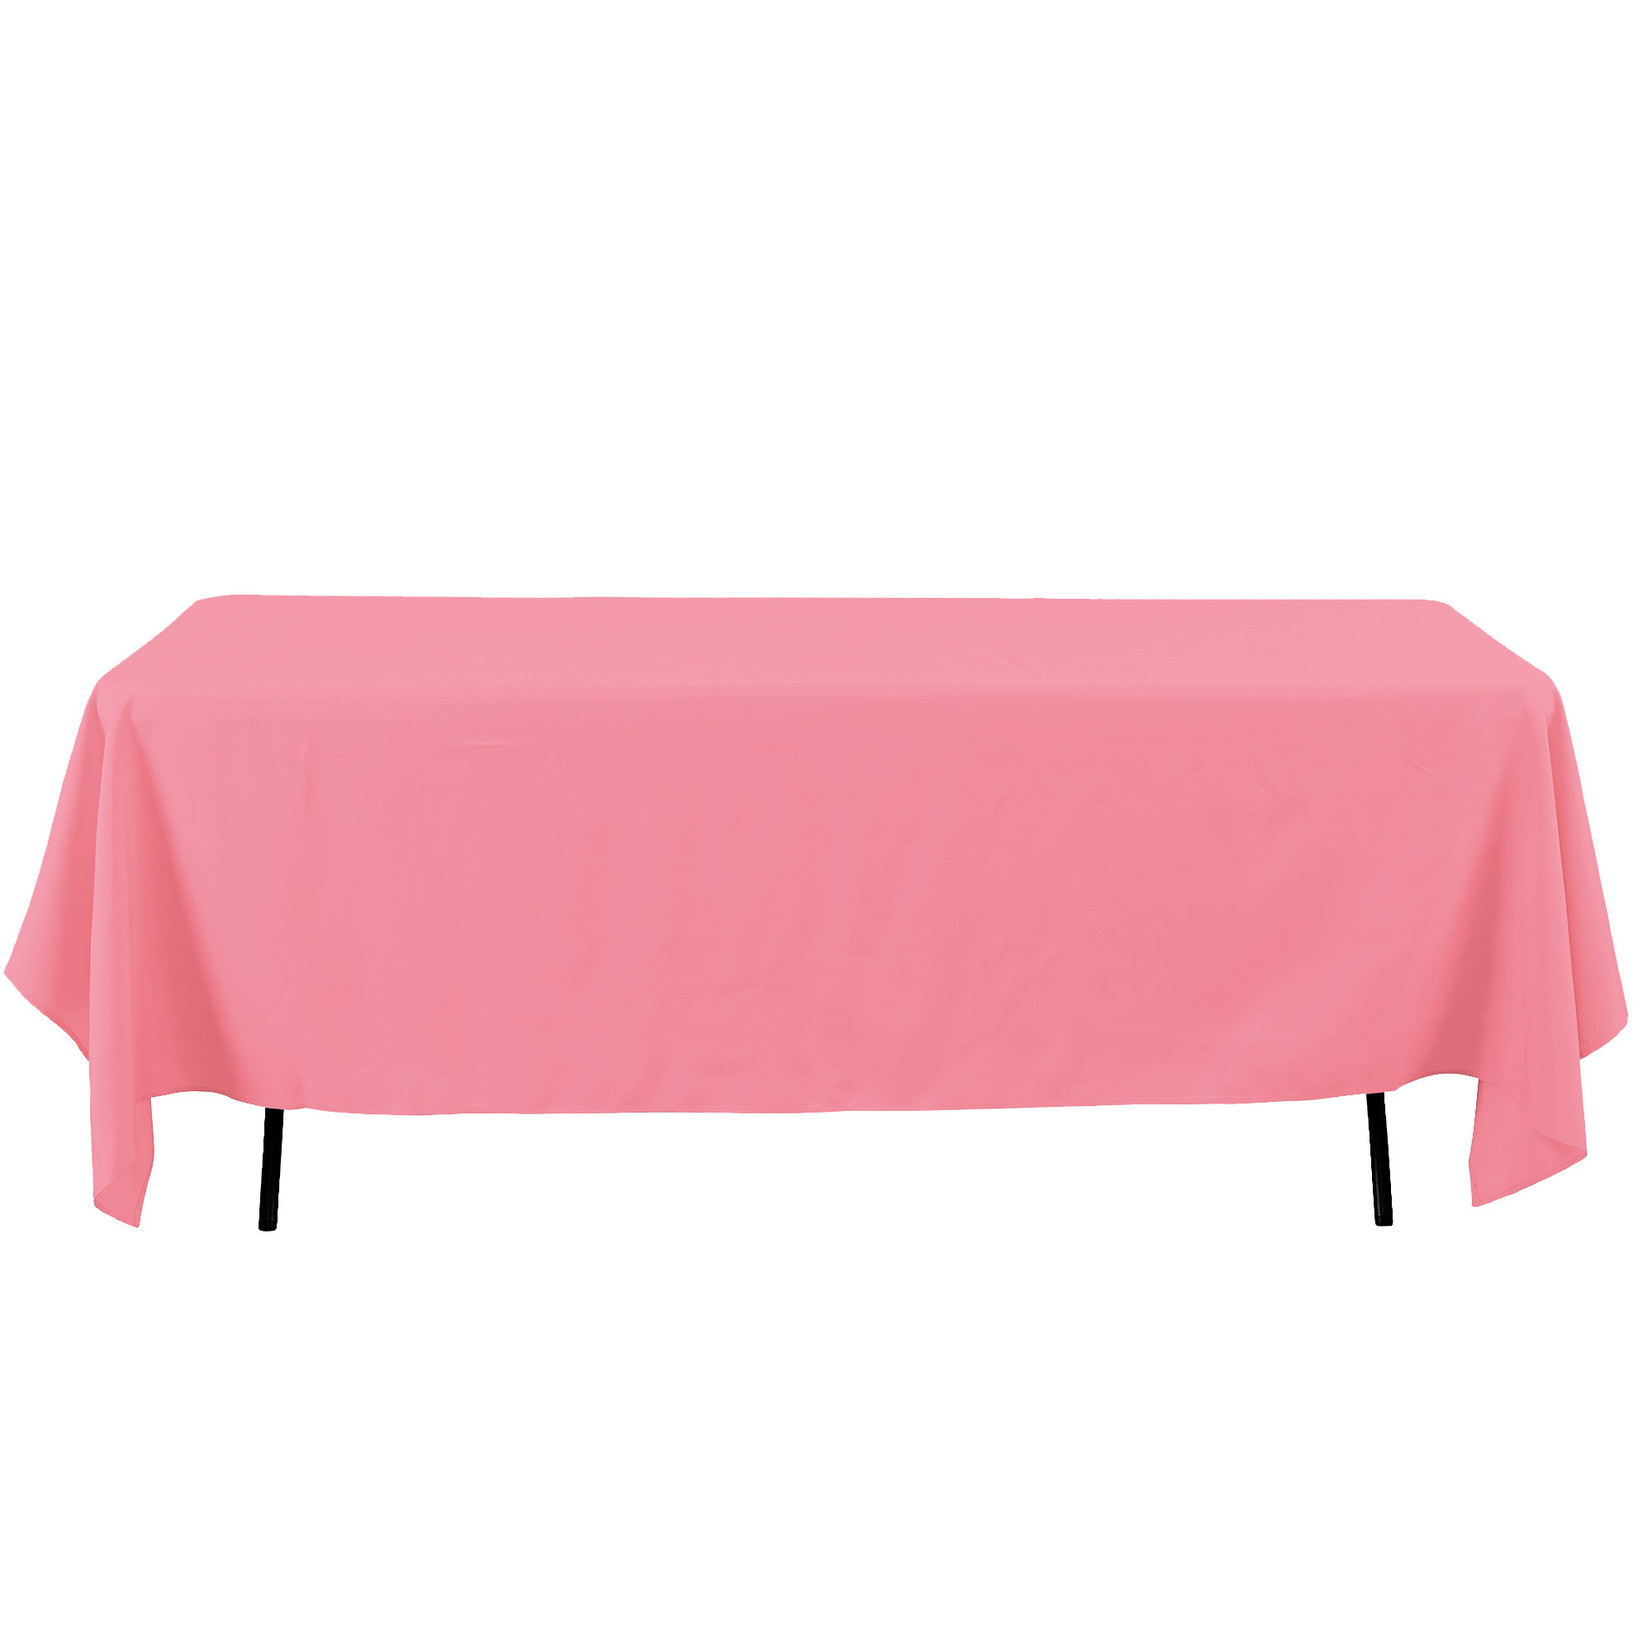 60 X 126’’ PINK RECTANGLE POLYESTER TABLE COVER